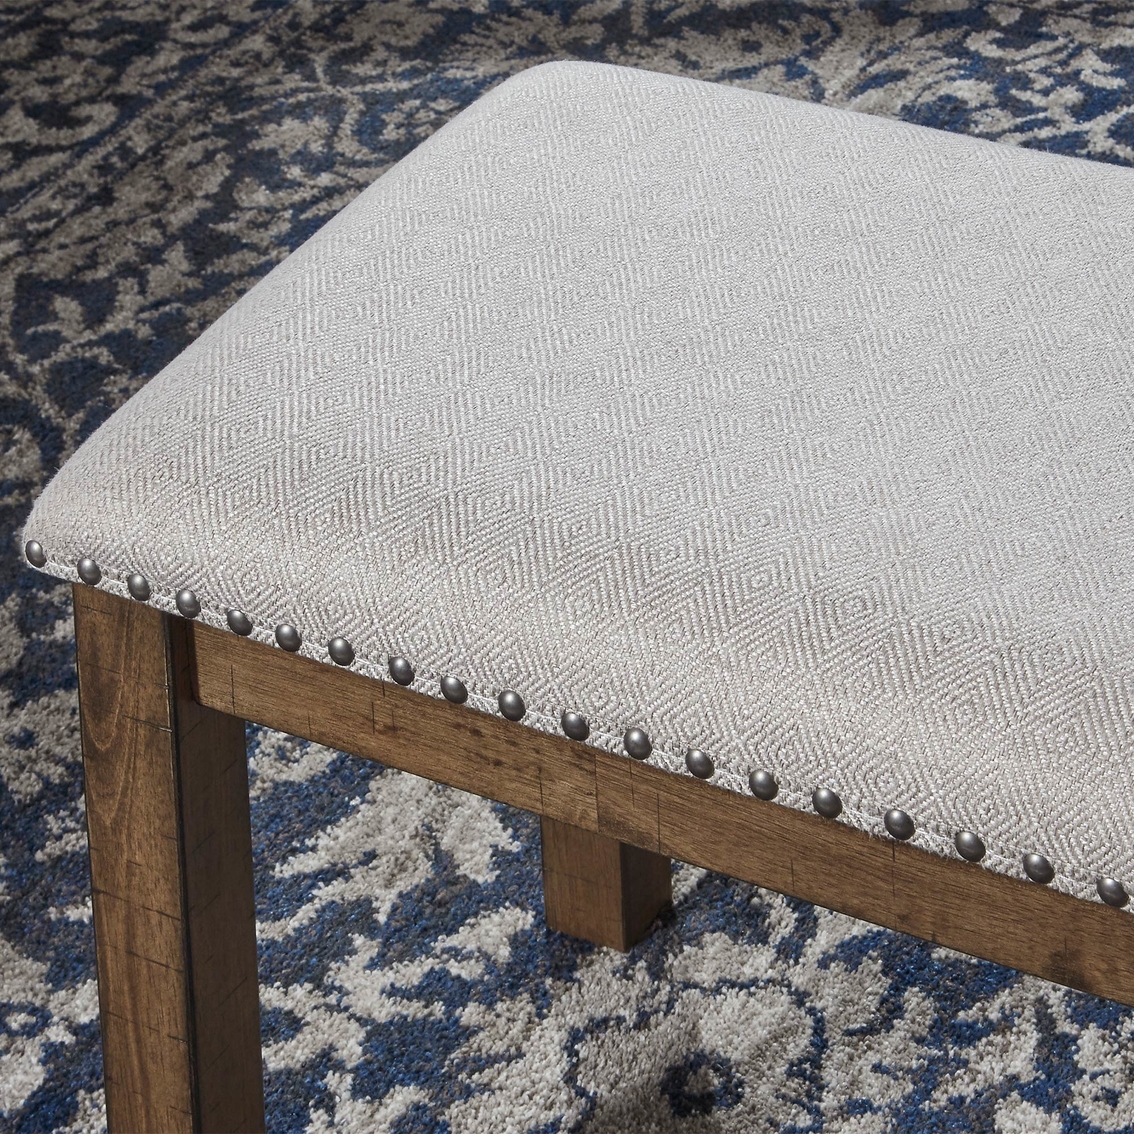 Signature Design by Ashley Moriville Upholstered Bench - Image 3 of 4